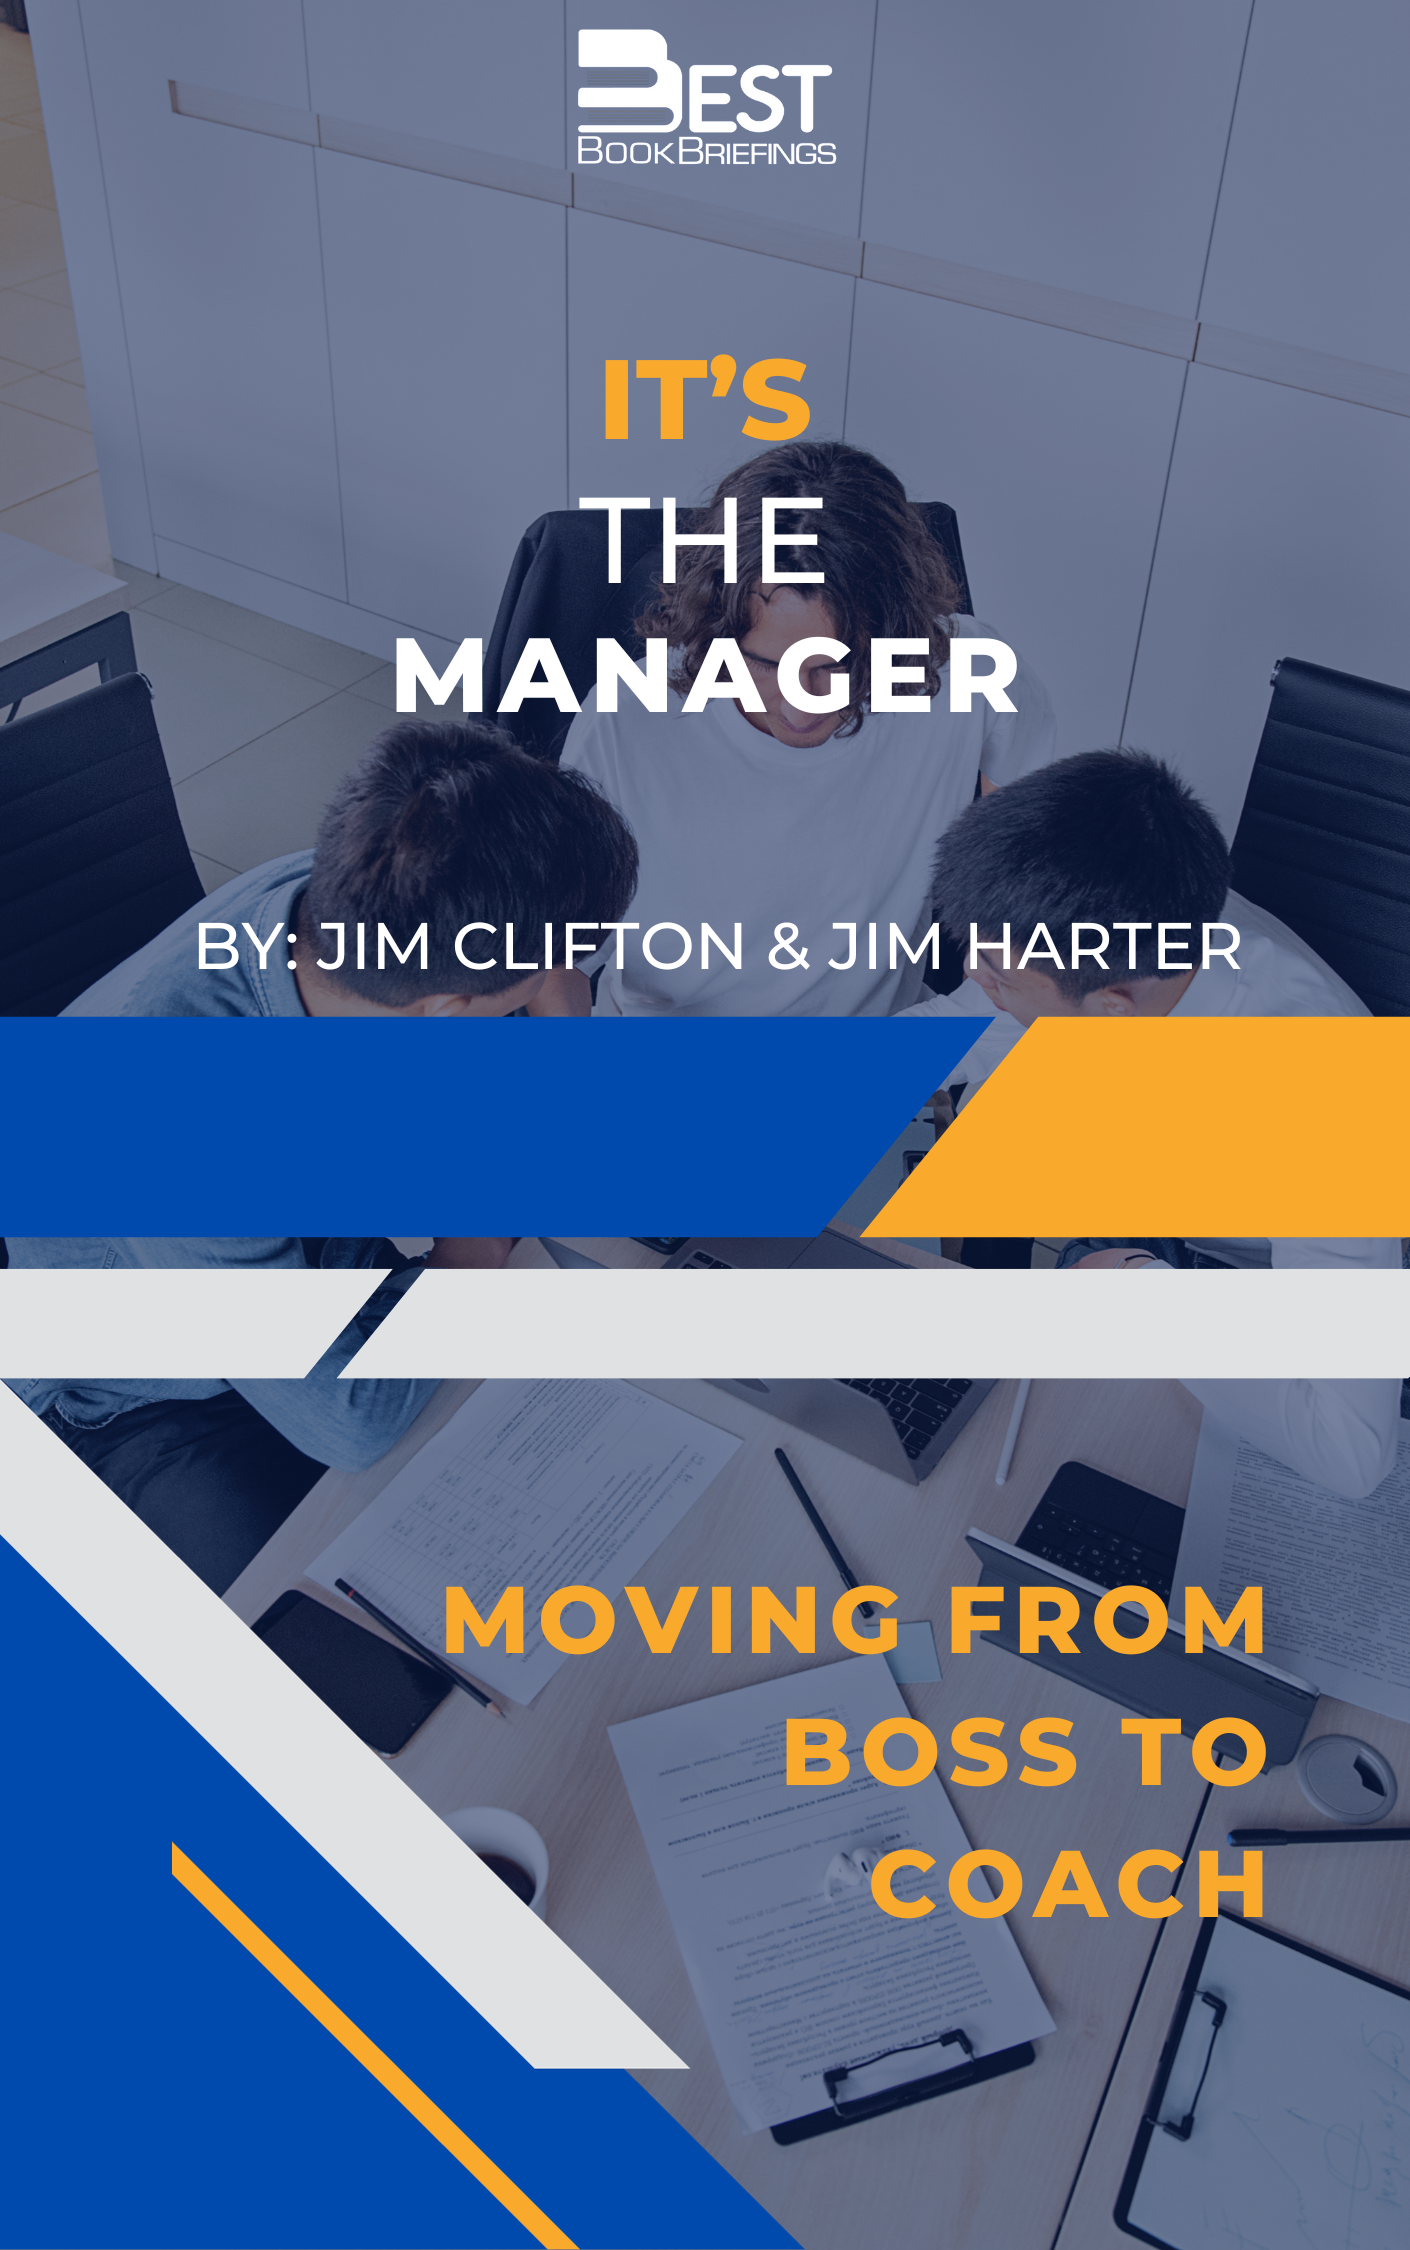   While the world’s workplace has been going through extraordinary historical change, the practice of management has been stuck in time for more than 30 years.   Packed with 52 discoveries from Gallup’s largest study on the future of work, It’s the Manager shows leaders how to adapt their organizations to rapid change, ranging 